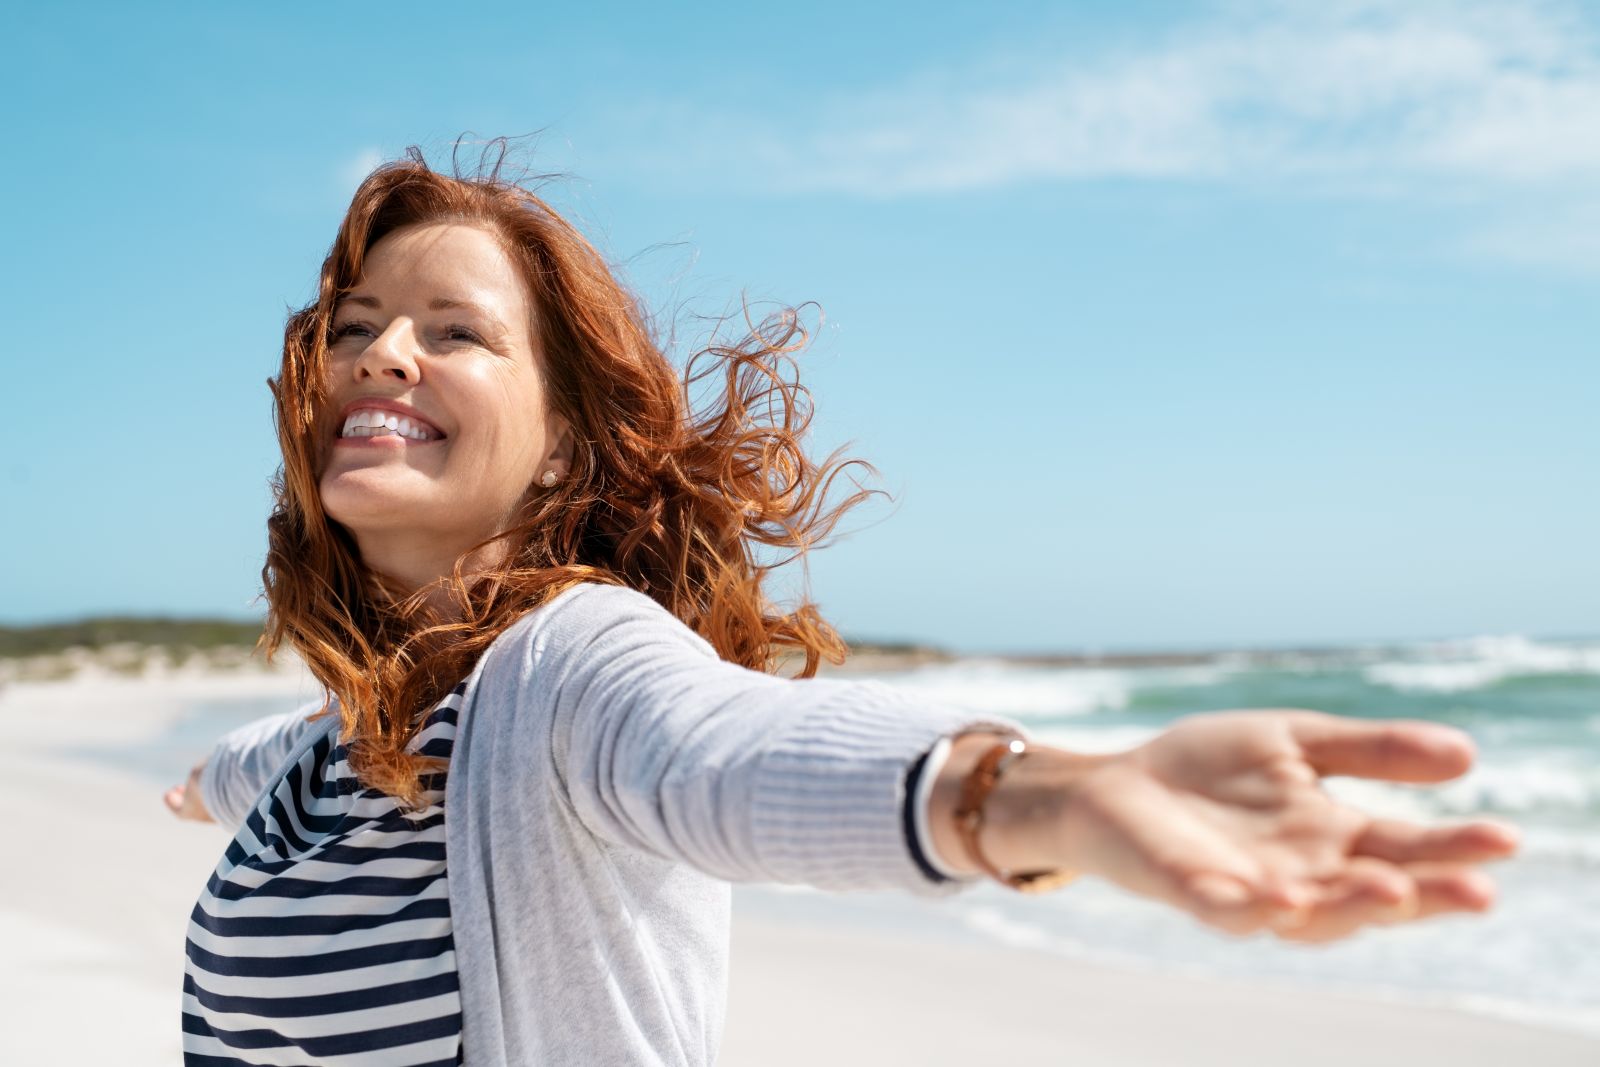 Smiling woman reaching out at the beach and enjoying good health